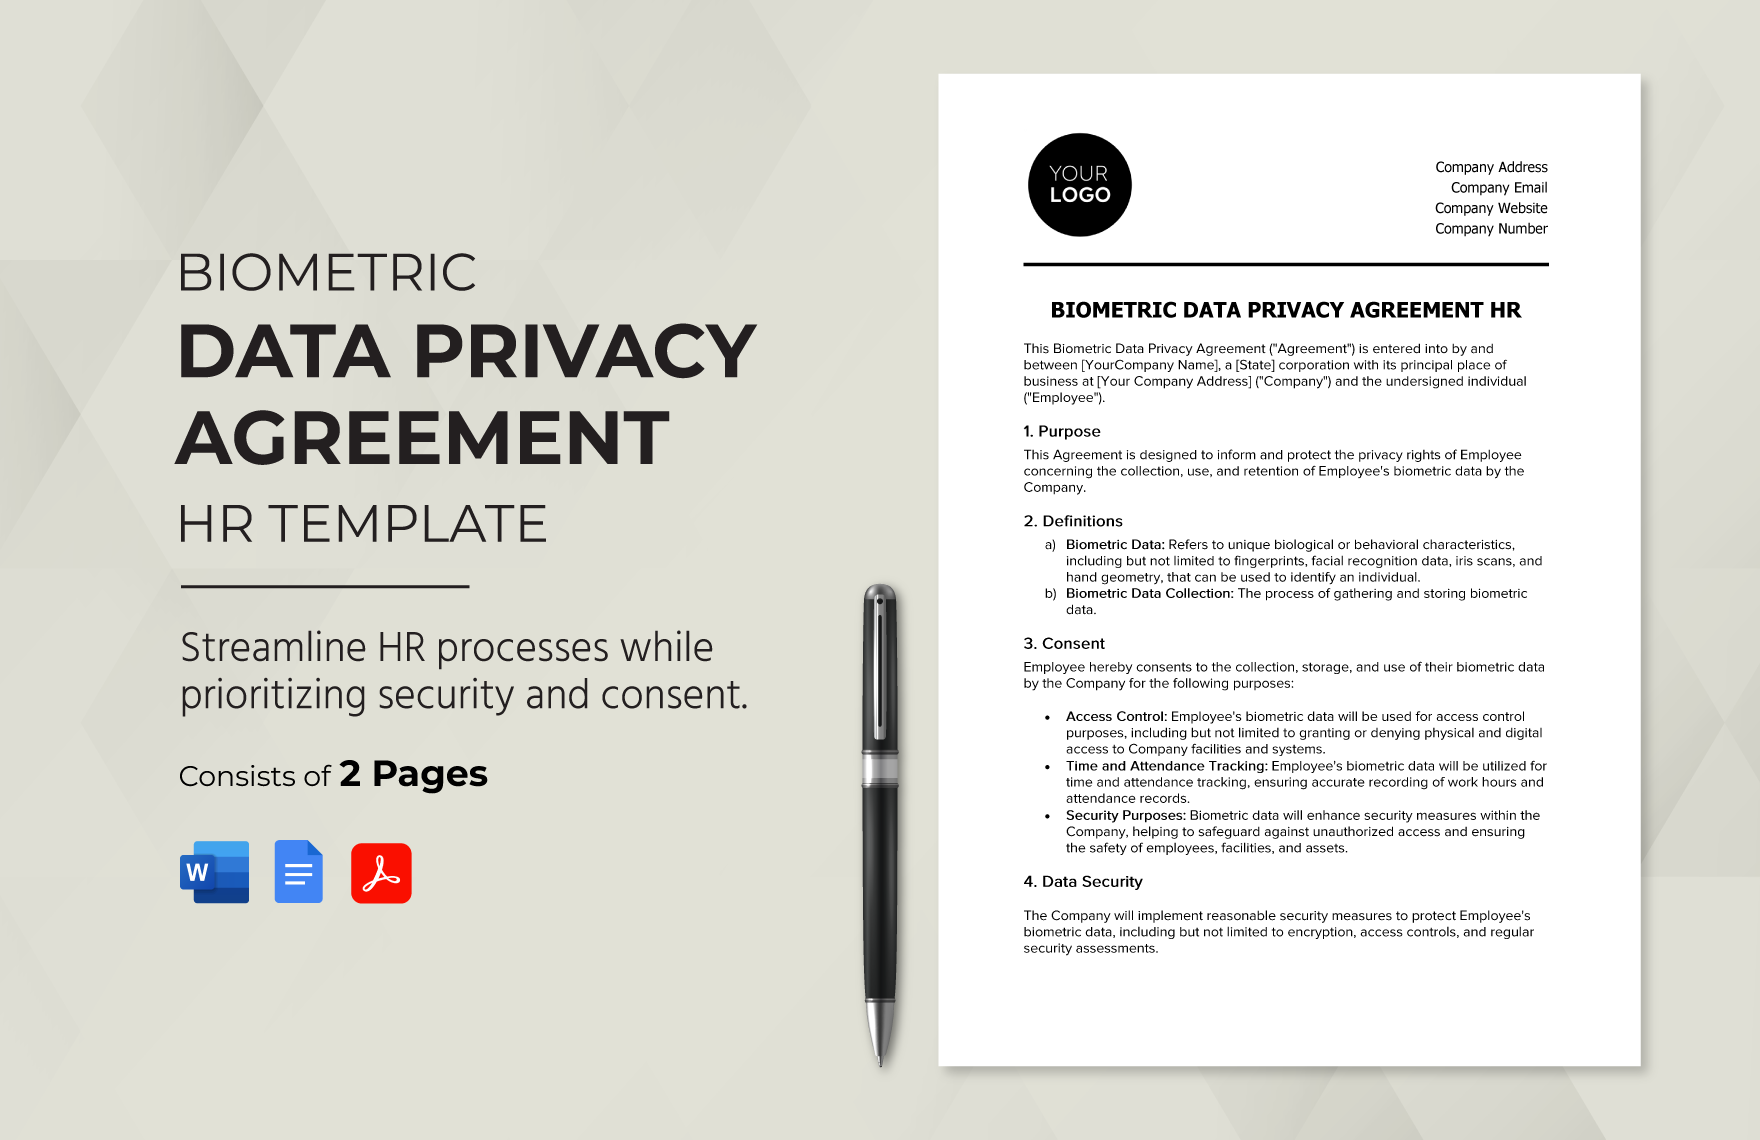 Biometric Data Privacy Agreement HR Template